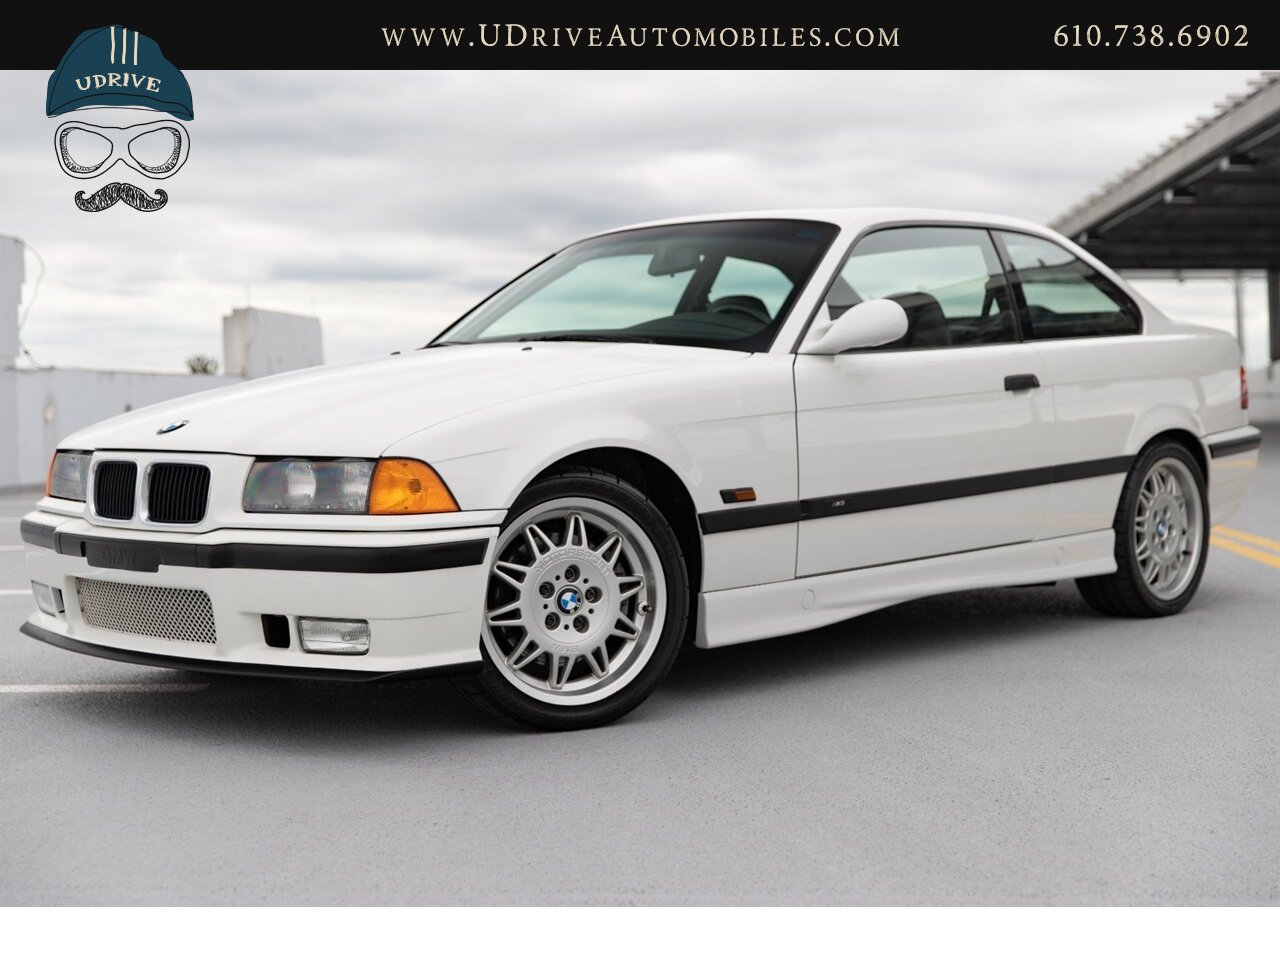 1995 BMW M3 E36 Alpine White over Black Vader Seats  5 Speed - Photo 1 - West Chester, PA 19382